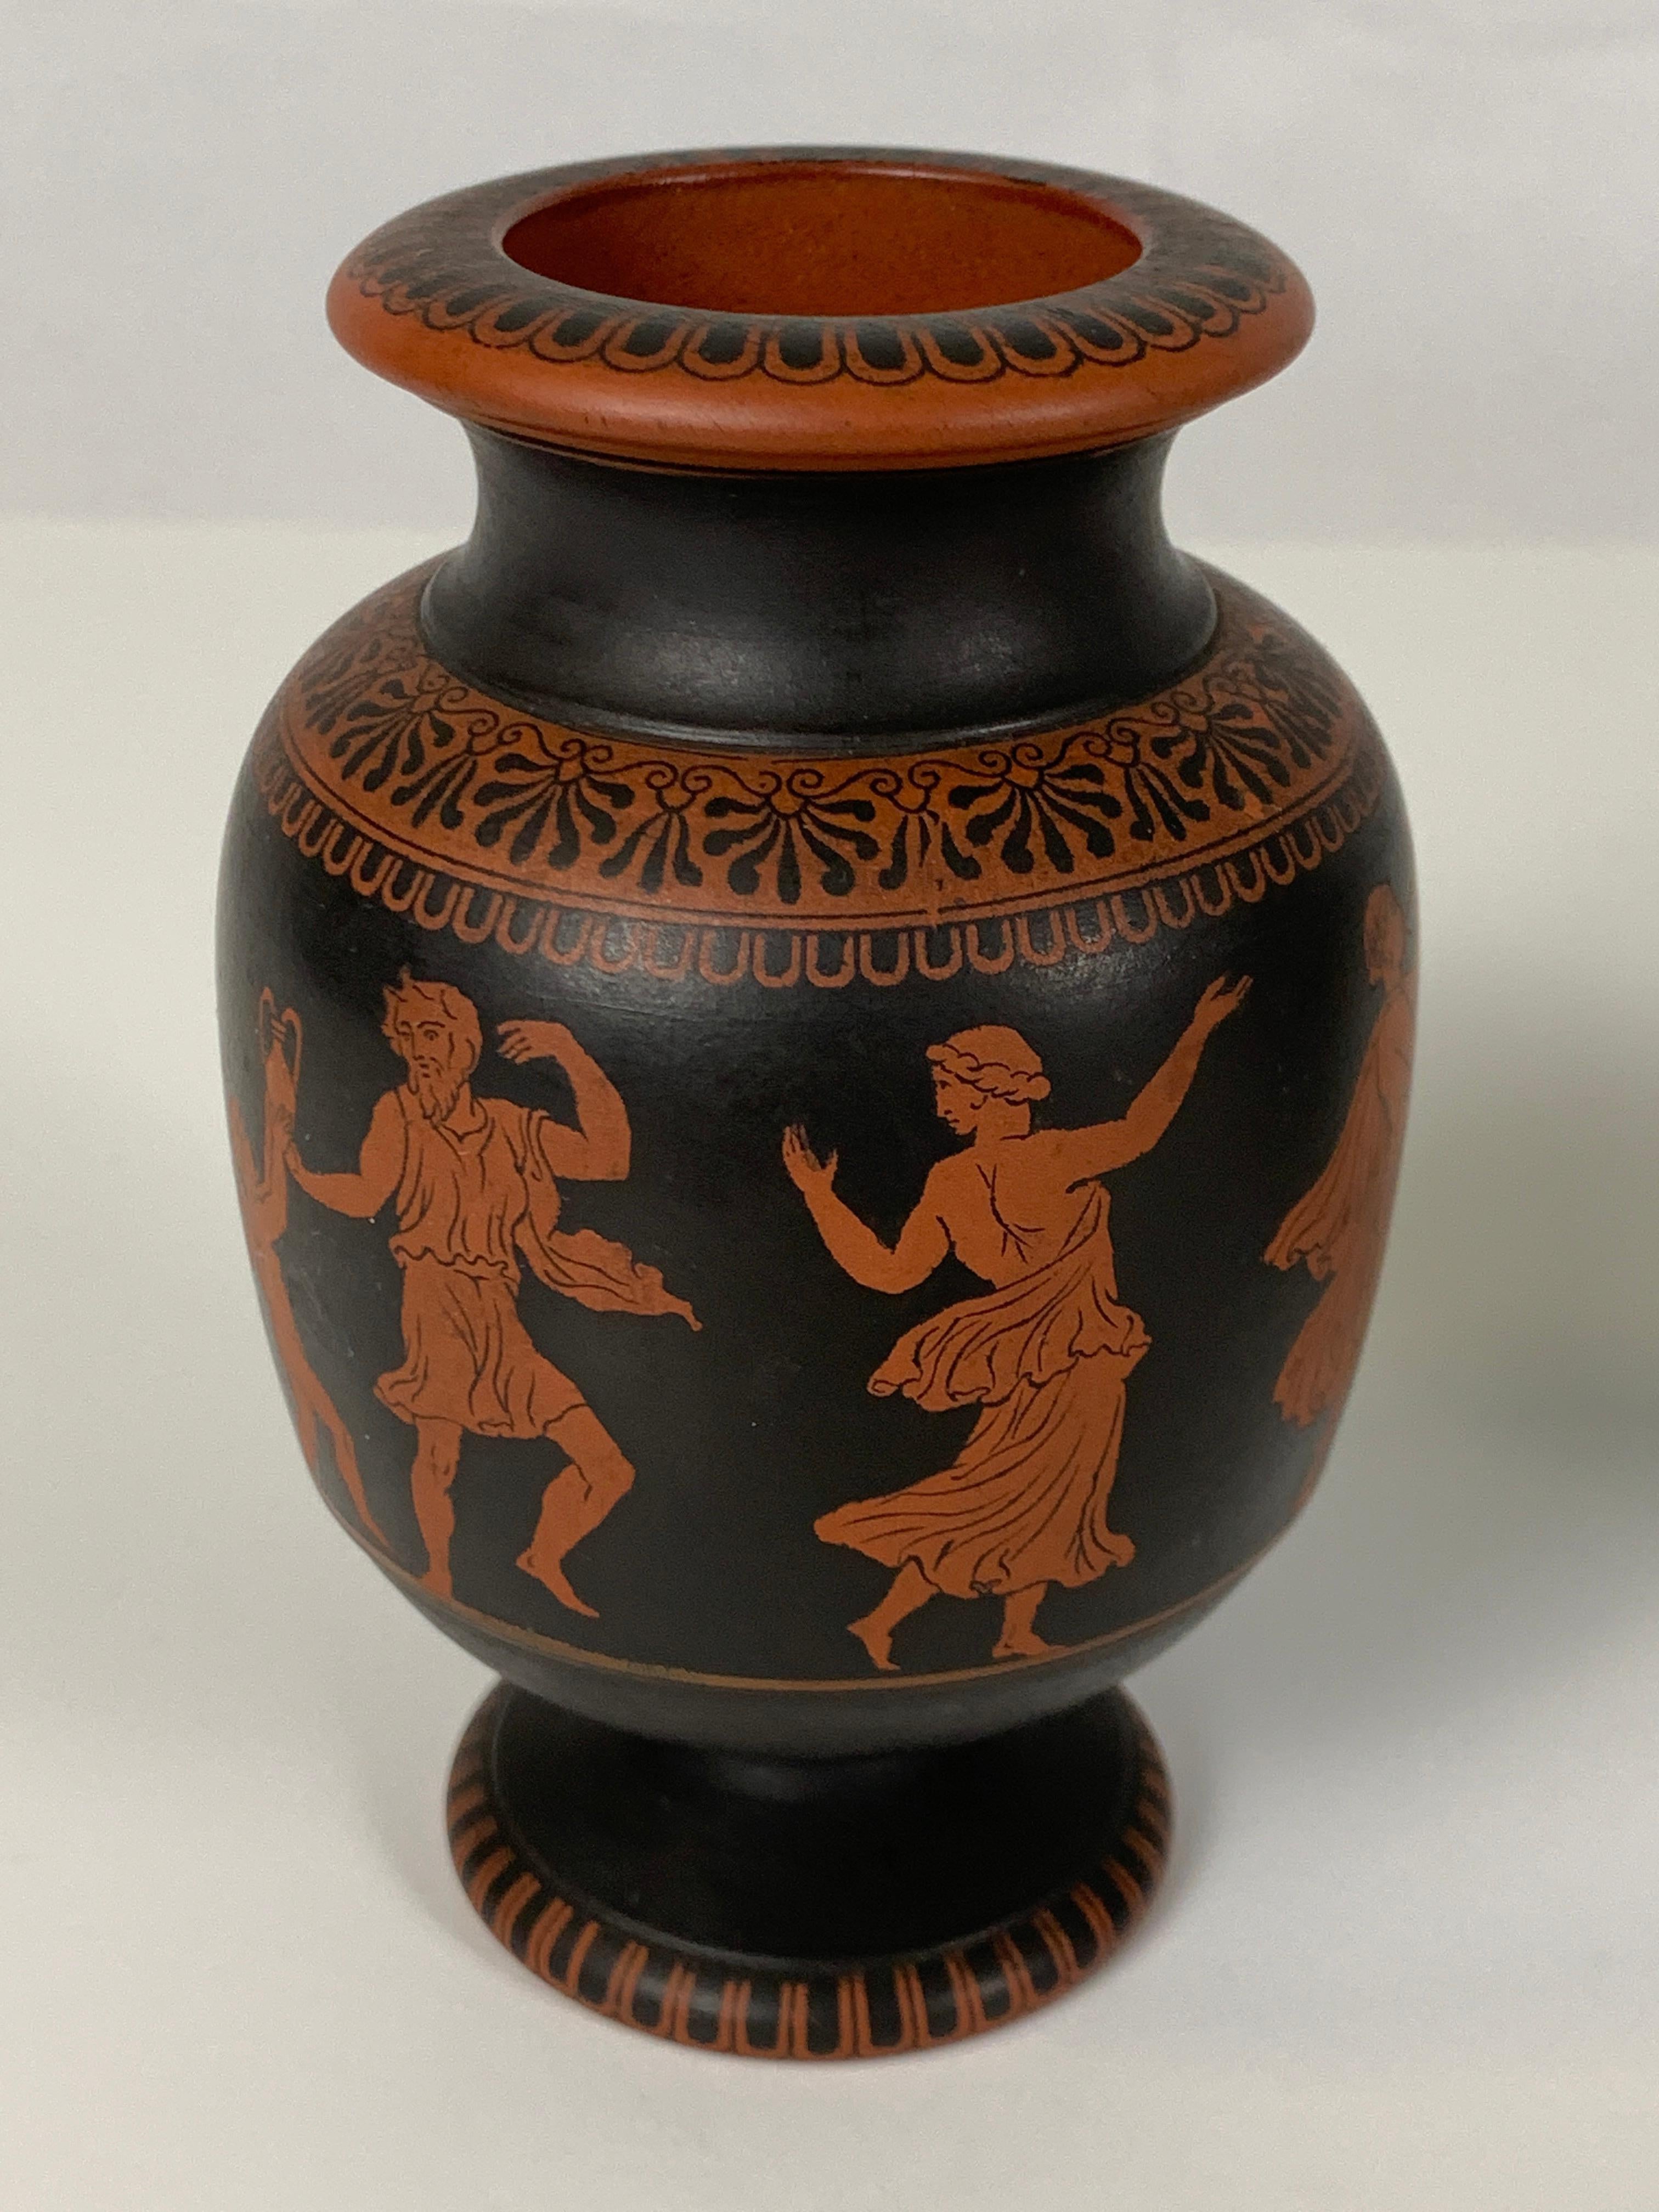 19th Century Pair of Small Terracotta Vases showing Classical Figures Made in England